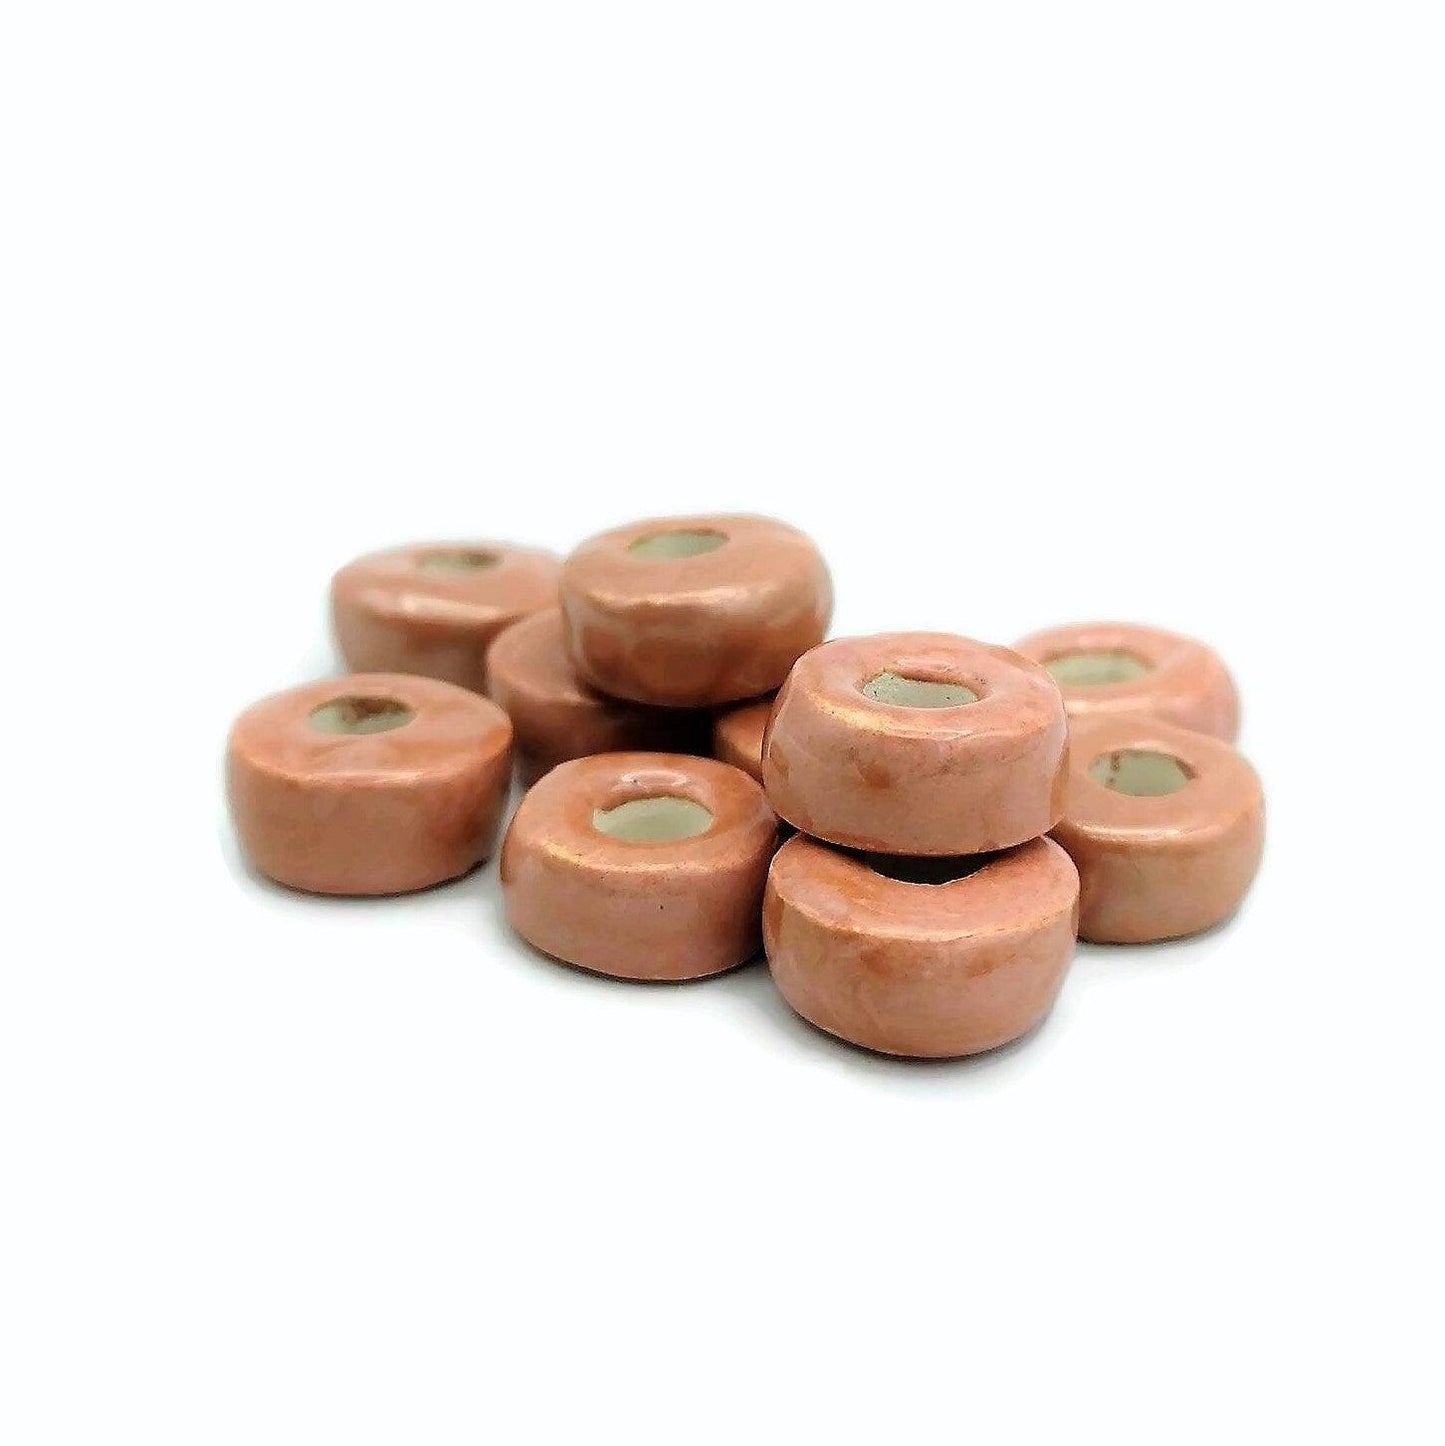 10Pc Ceramic Macrame Beads With Large Hole For Jewelry Making, Coral Pink Clay Tube Beads for Bracelets, Dreadlock Beads Braid Accessories - Ceramica Ana Rafael